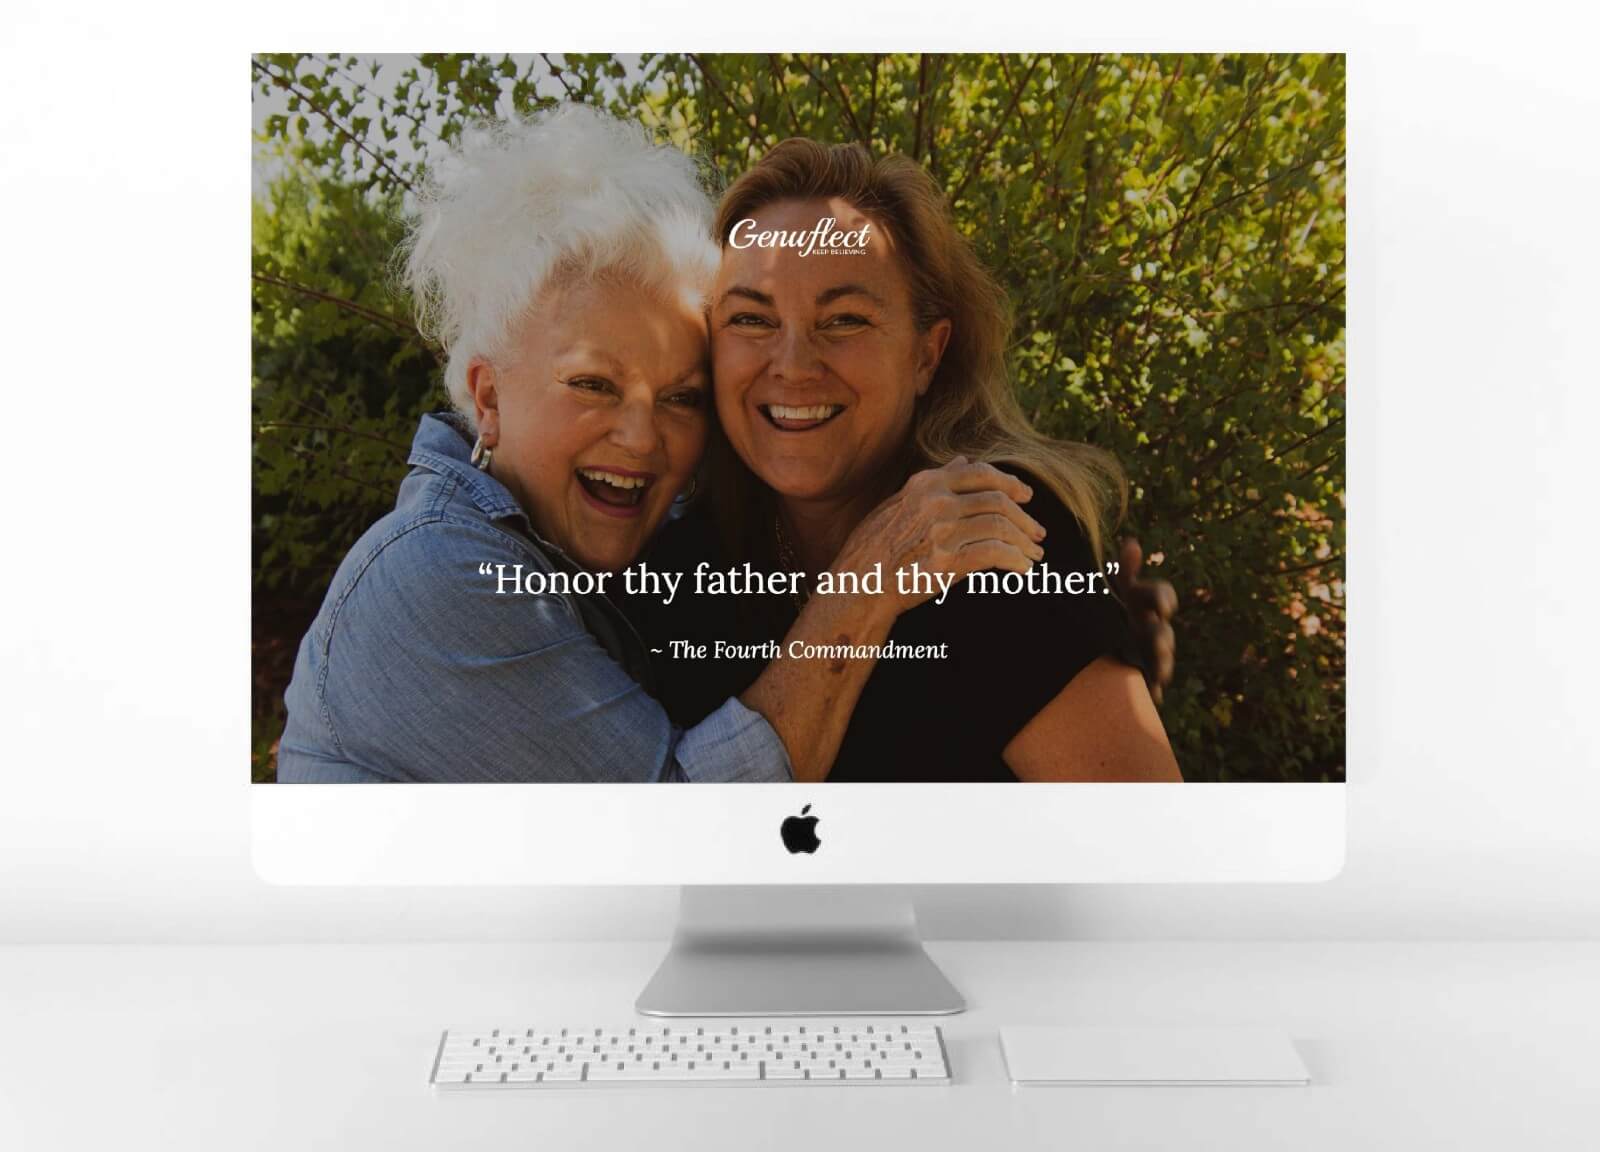 Genuflect computer background image of a Woman hugging her mother